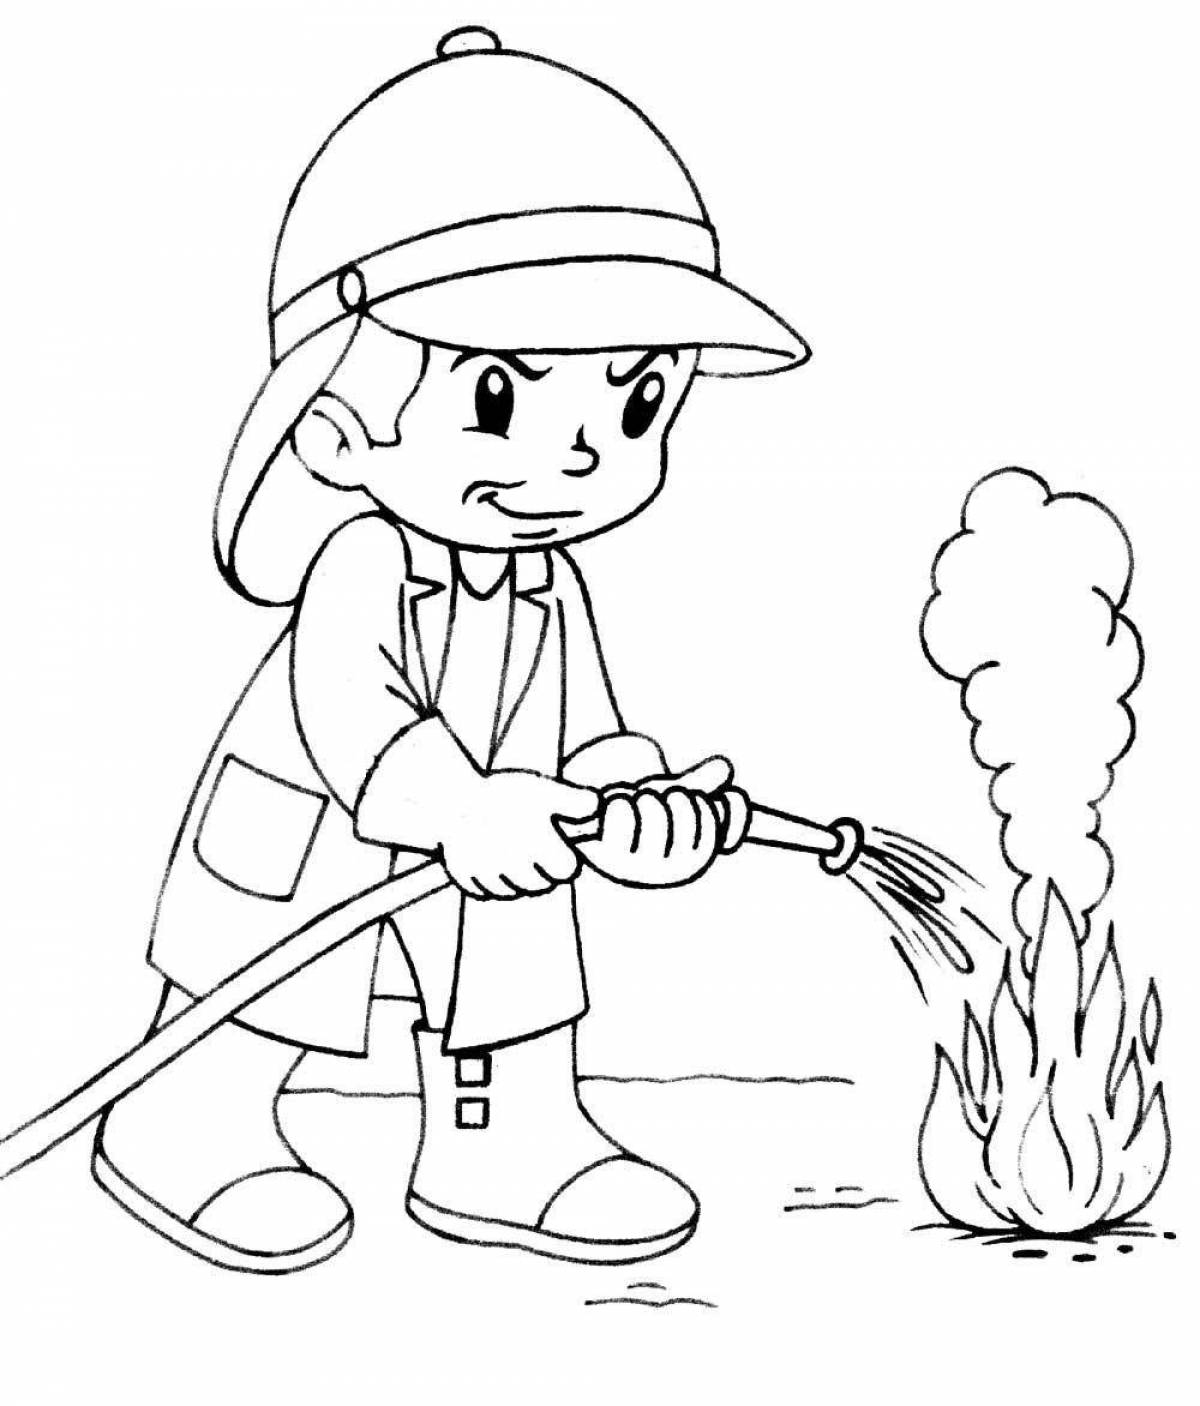 Awesome fireman coloring book